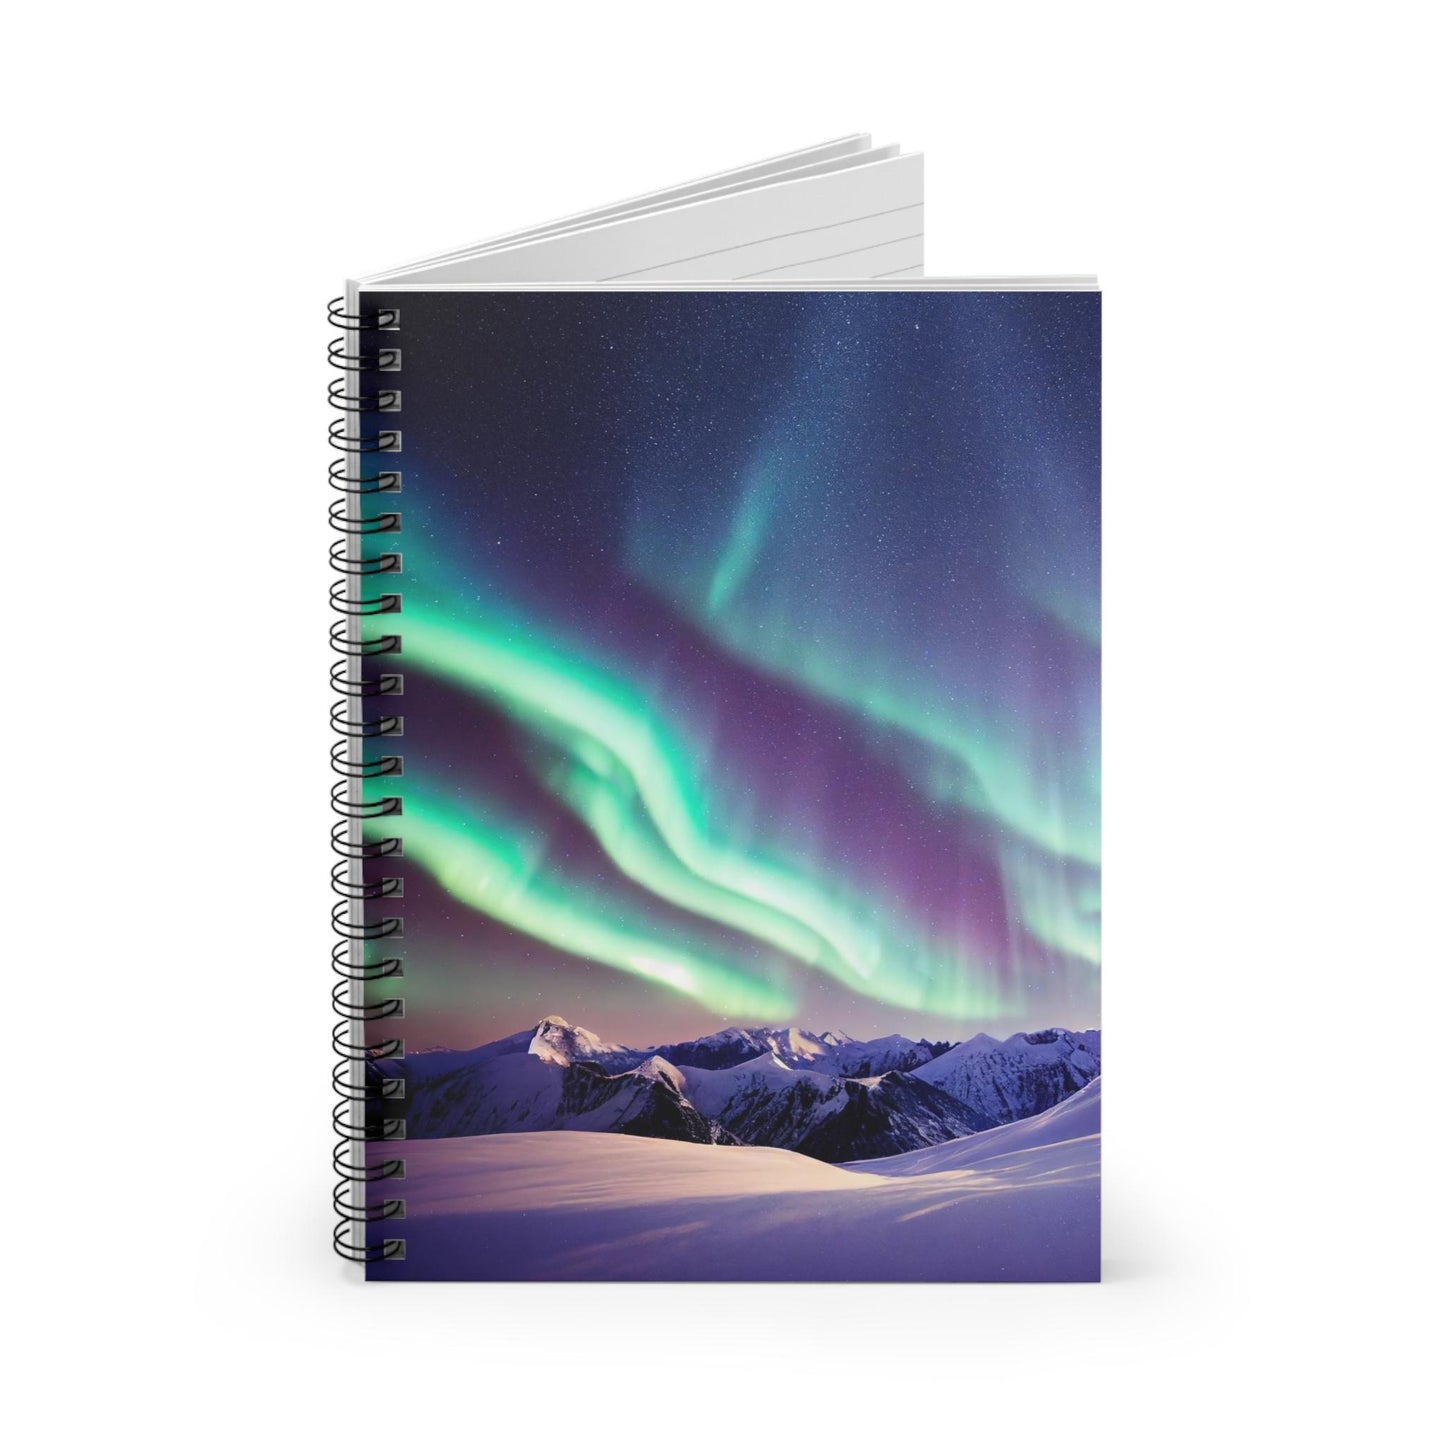 Unique Aurora Borealis Spiral Notebook Ruled Line - Personalized Northern Light View - Stationary Accessories - Perfect Aurora Lovers Gift 28